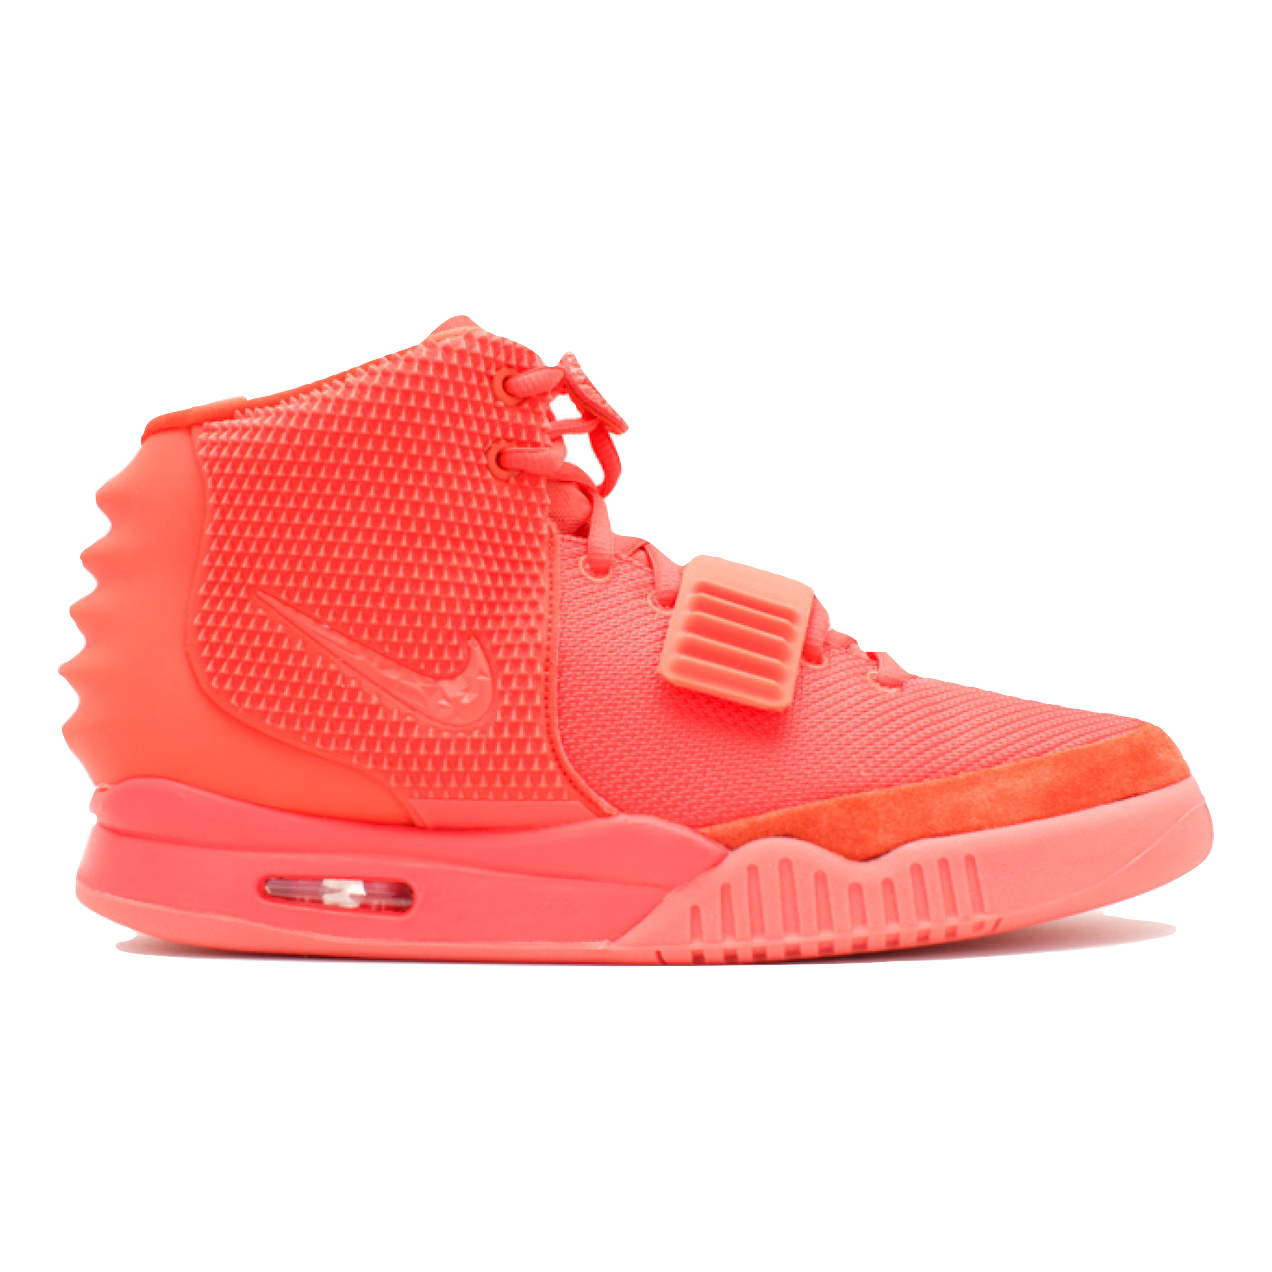 Air Yeezy 2 - Red October